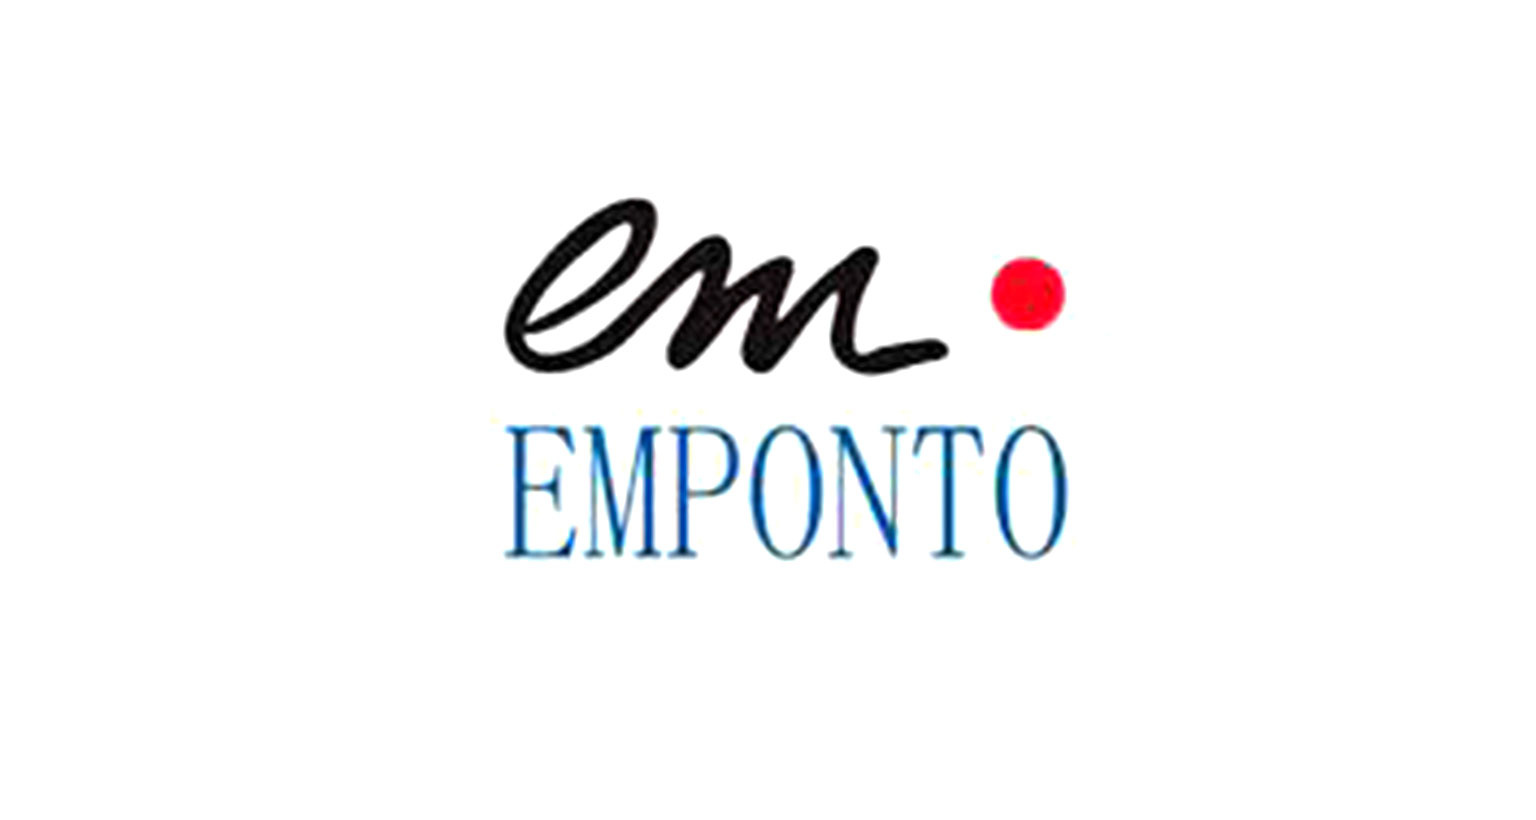 Digital transformation in a traditional market? Emponto shows it’s possible